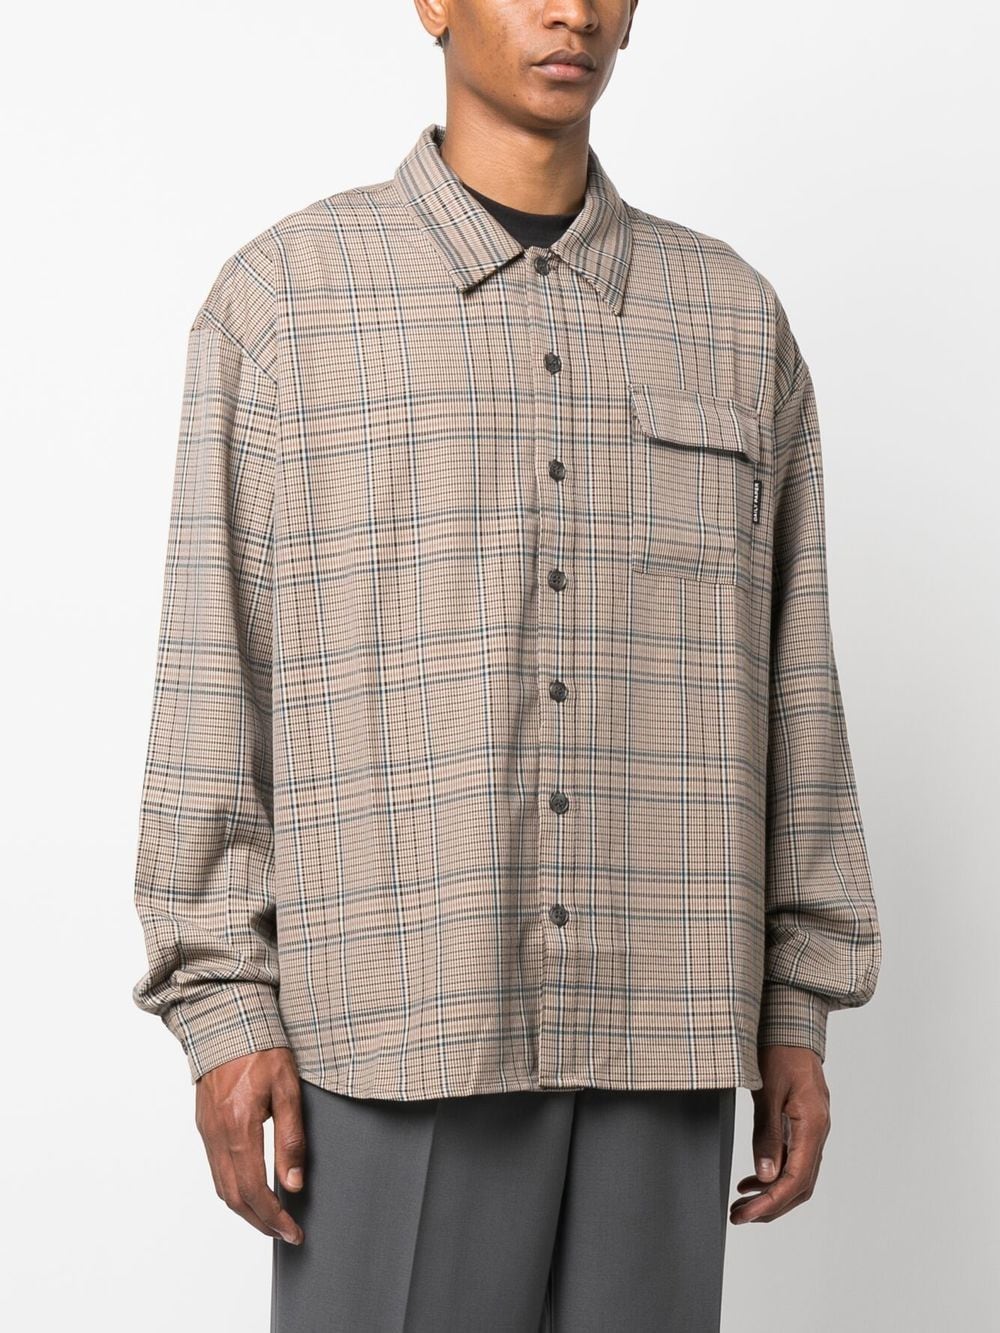 Daily Paper Capsule DAILY PAPER CAPSULE- Printed Checked Shirt